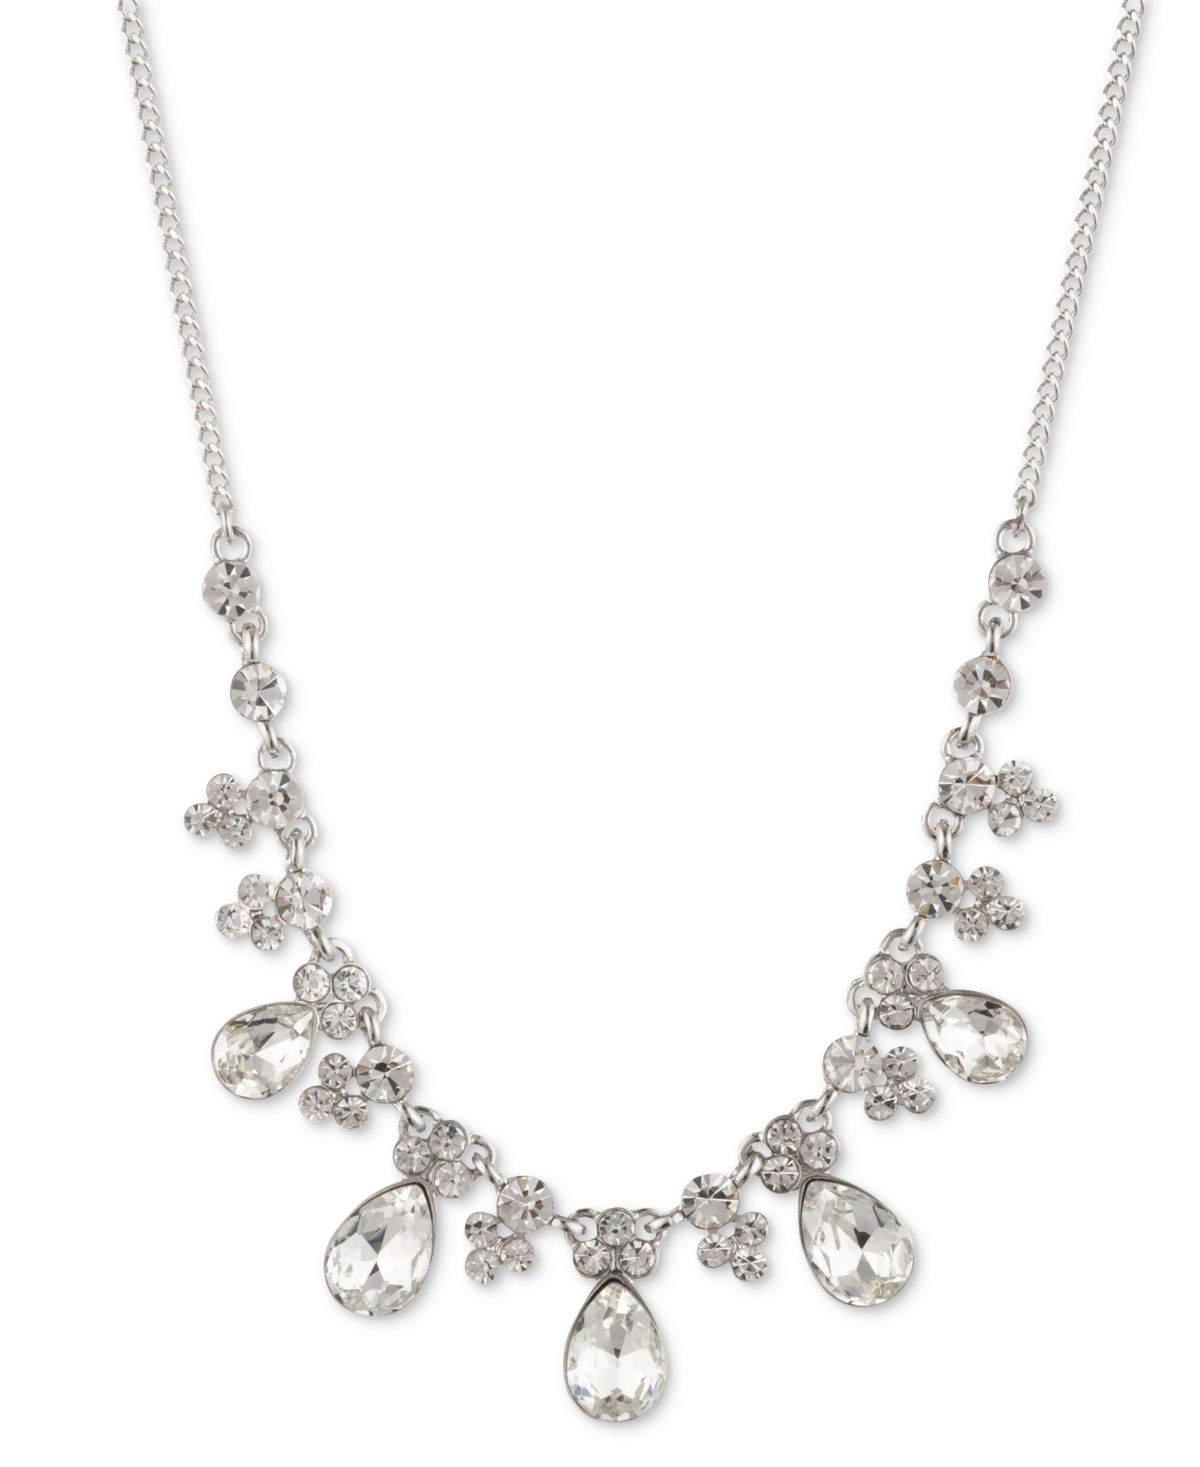 Givenchy Silver-Tone Pear Crystal Statement Necklace, 16" + 3" extender | Macys (US)